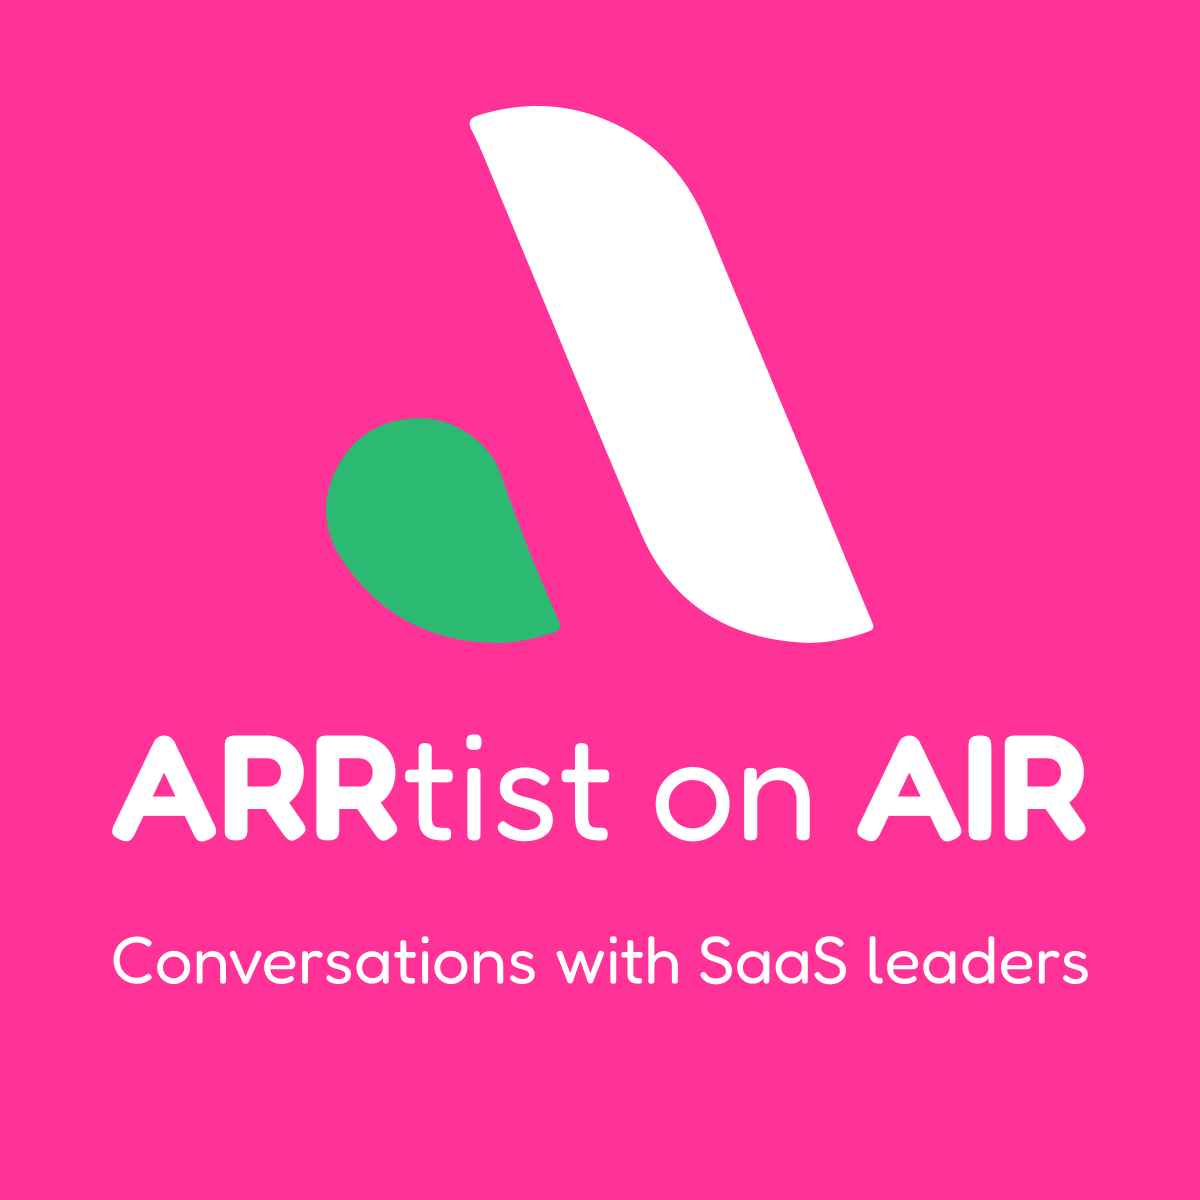 ARRtist on AIR - Meaningful conversations with SaaS leaders